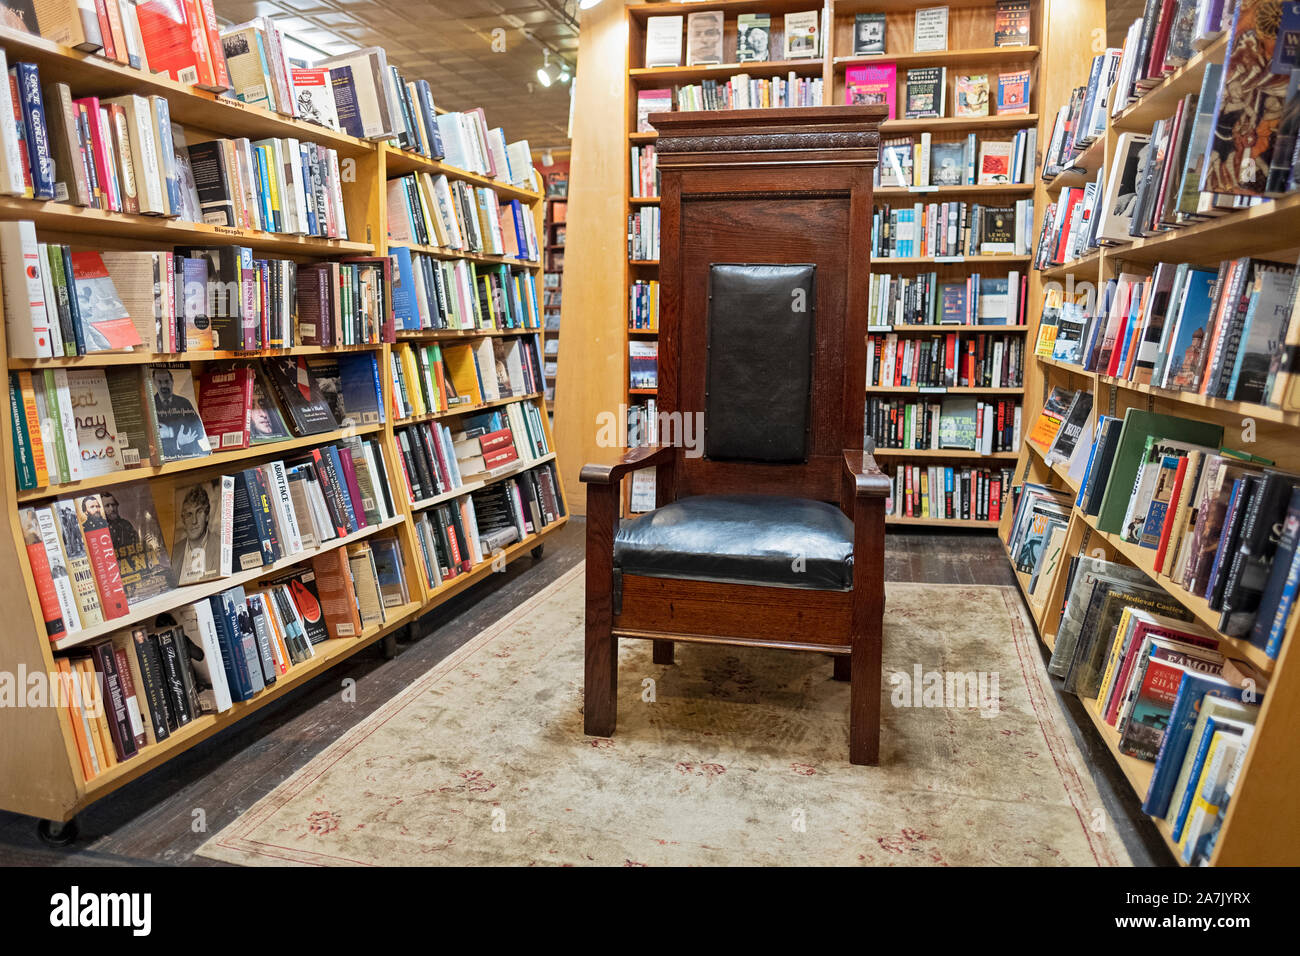 The cozy friendly interior of the INQUIRING MIND BOOKSTORE in Saugerties, New York. Stock Photo